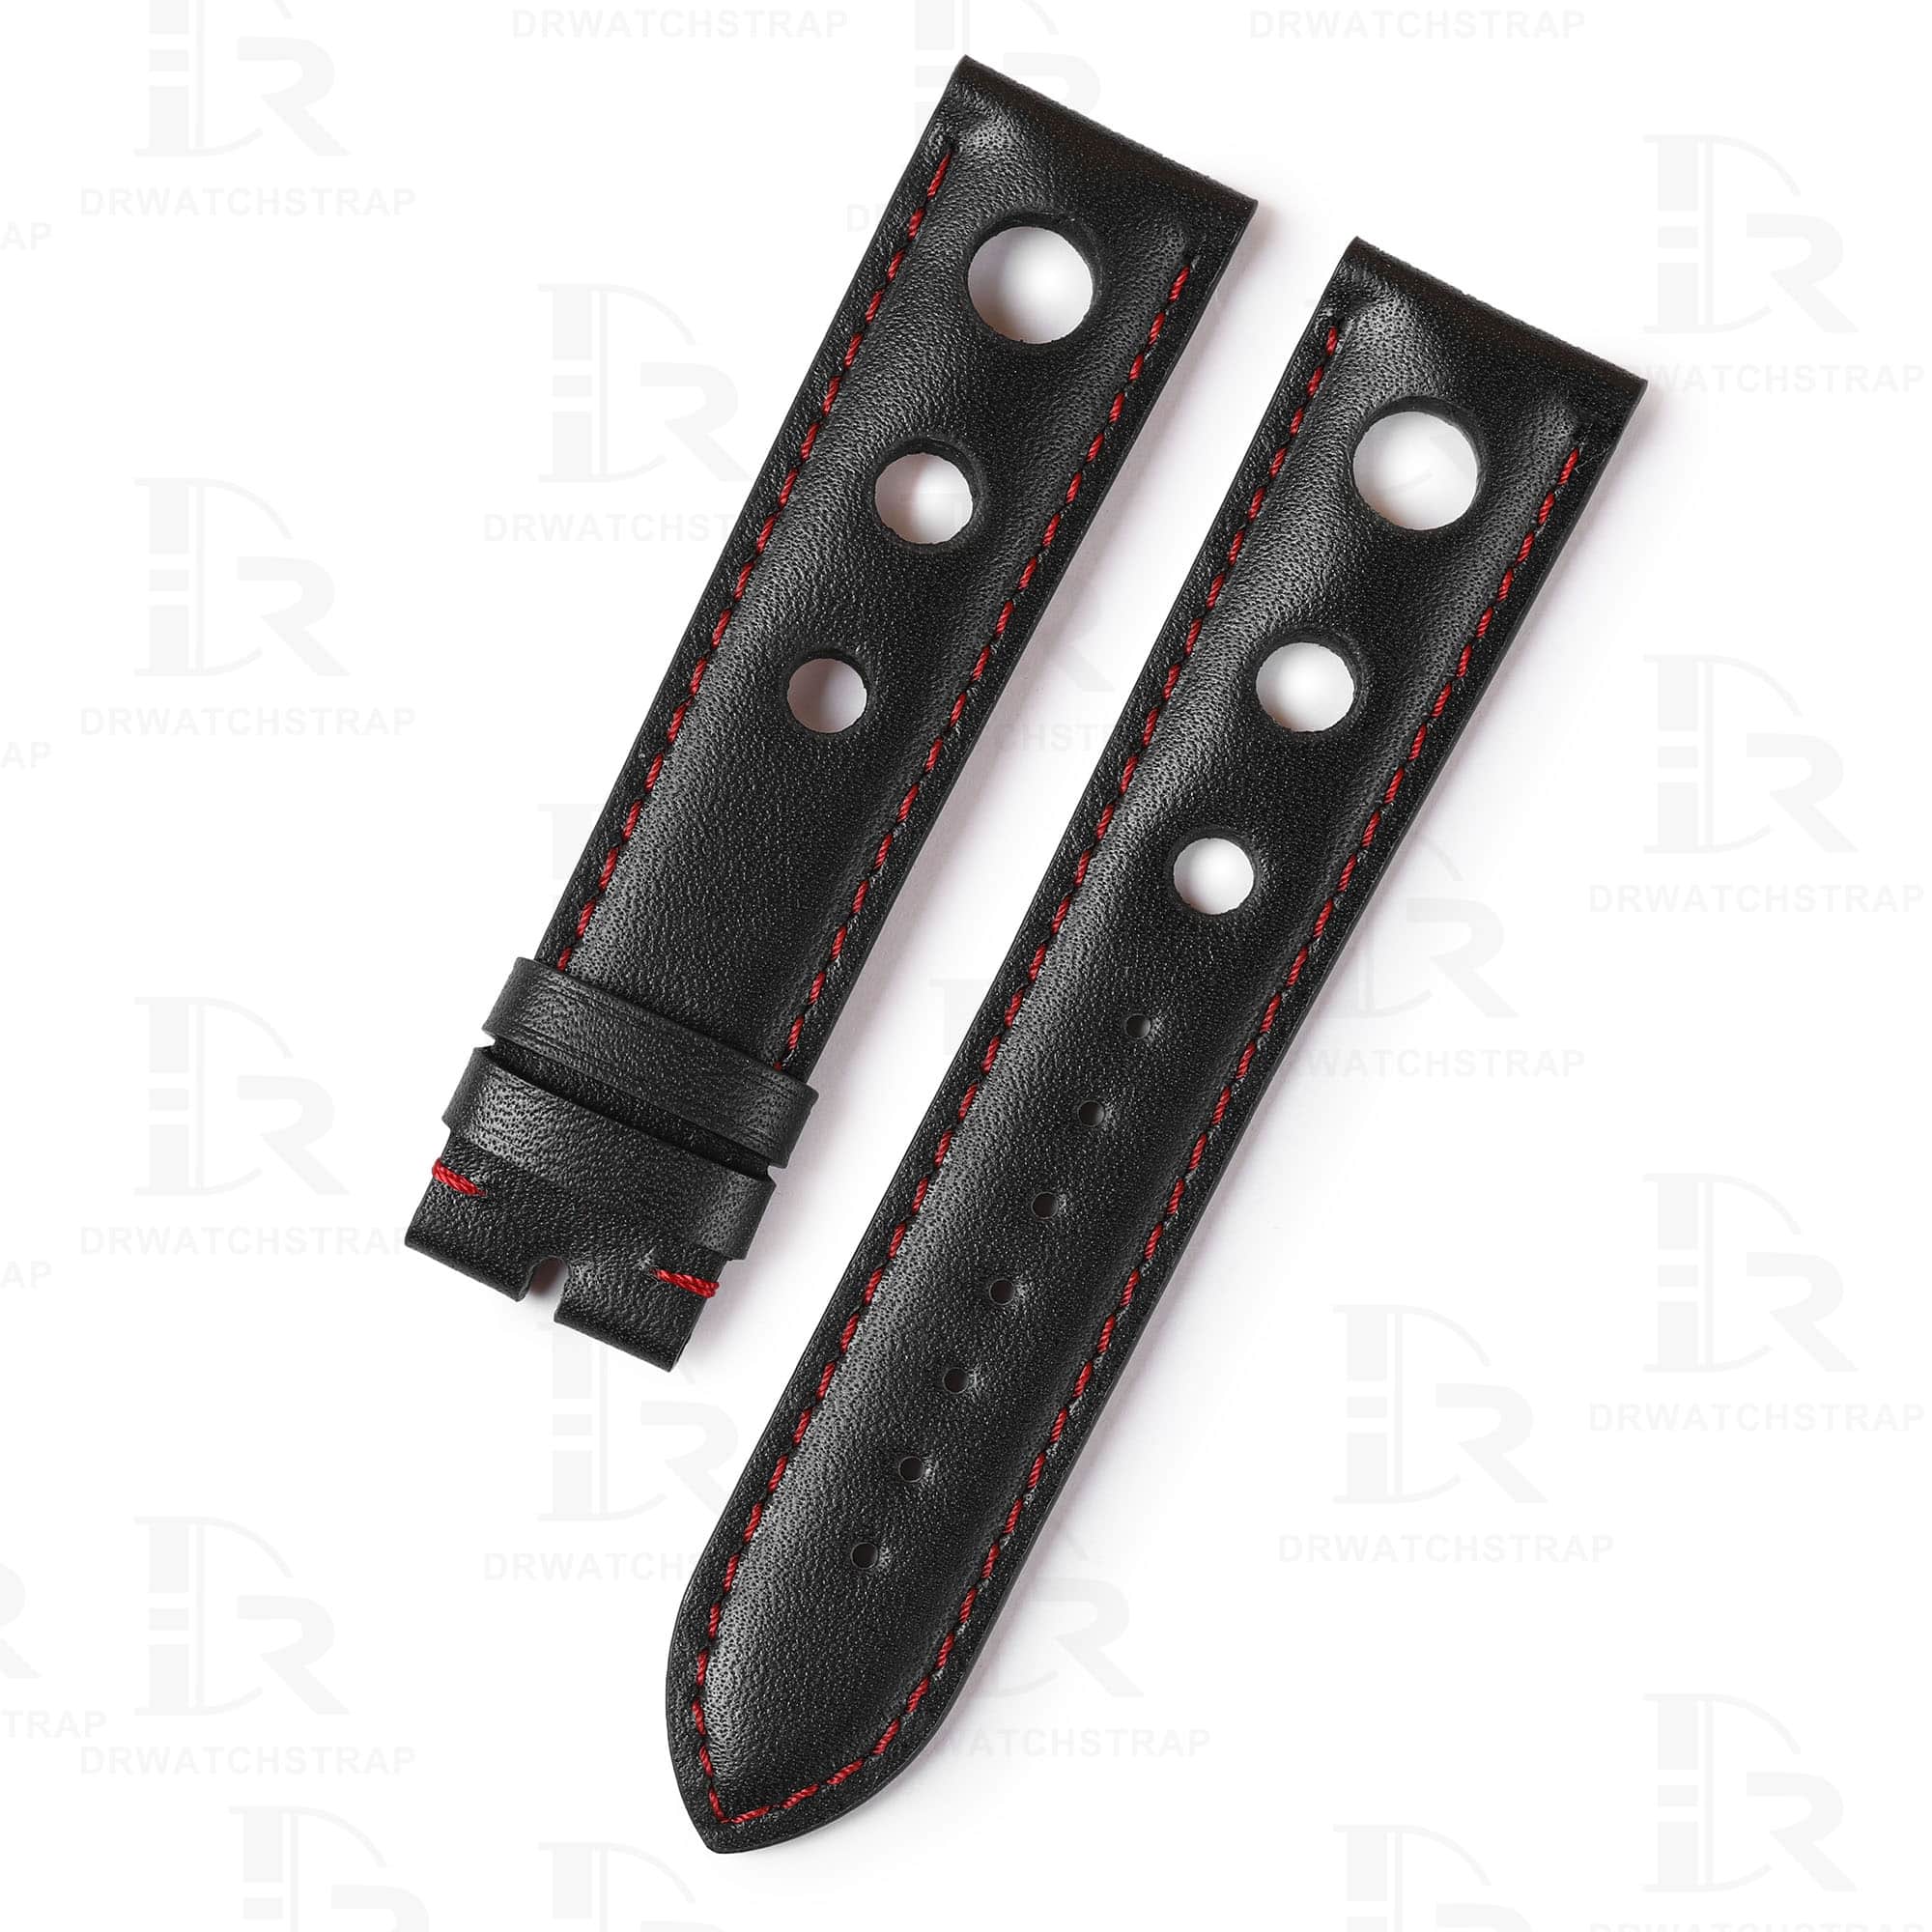 Handmade replacement leather watchbands for Chopard Mille Miglia straps